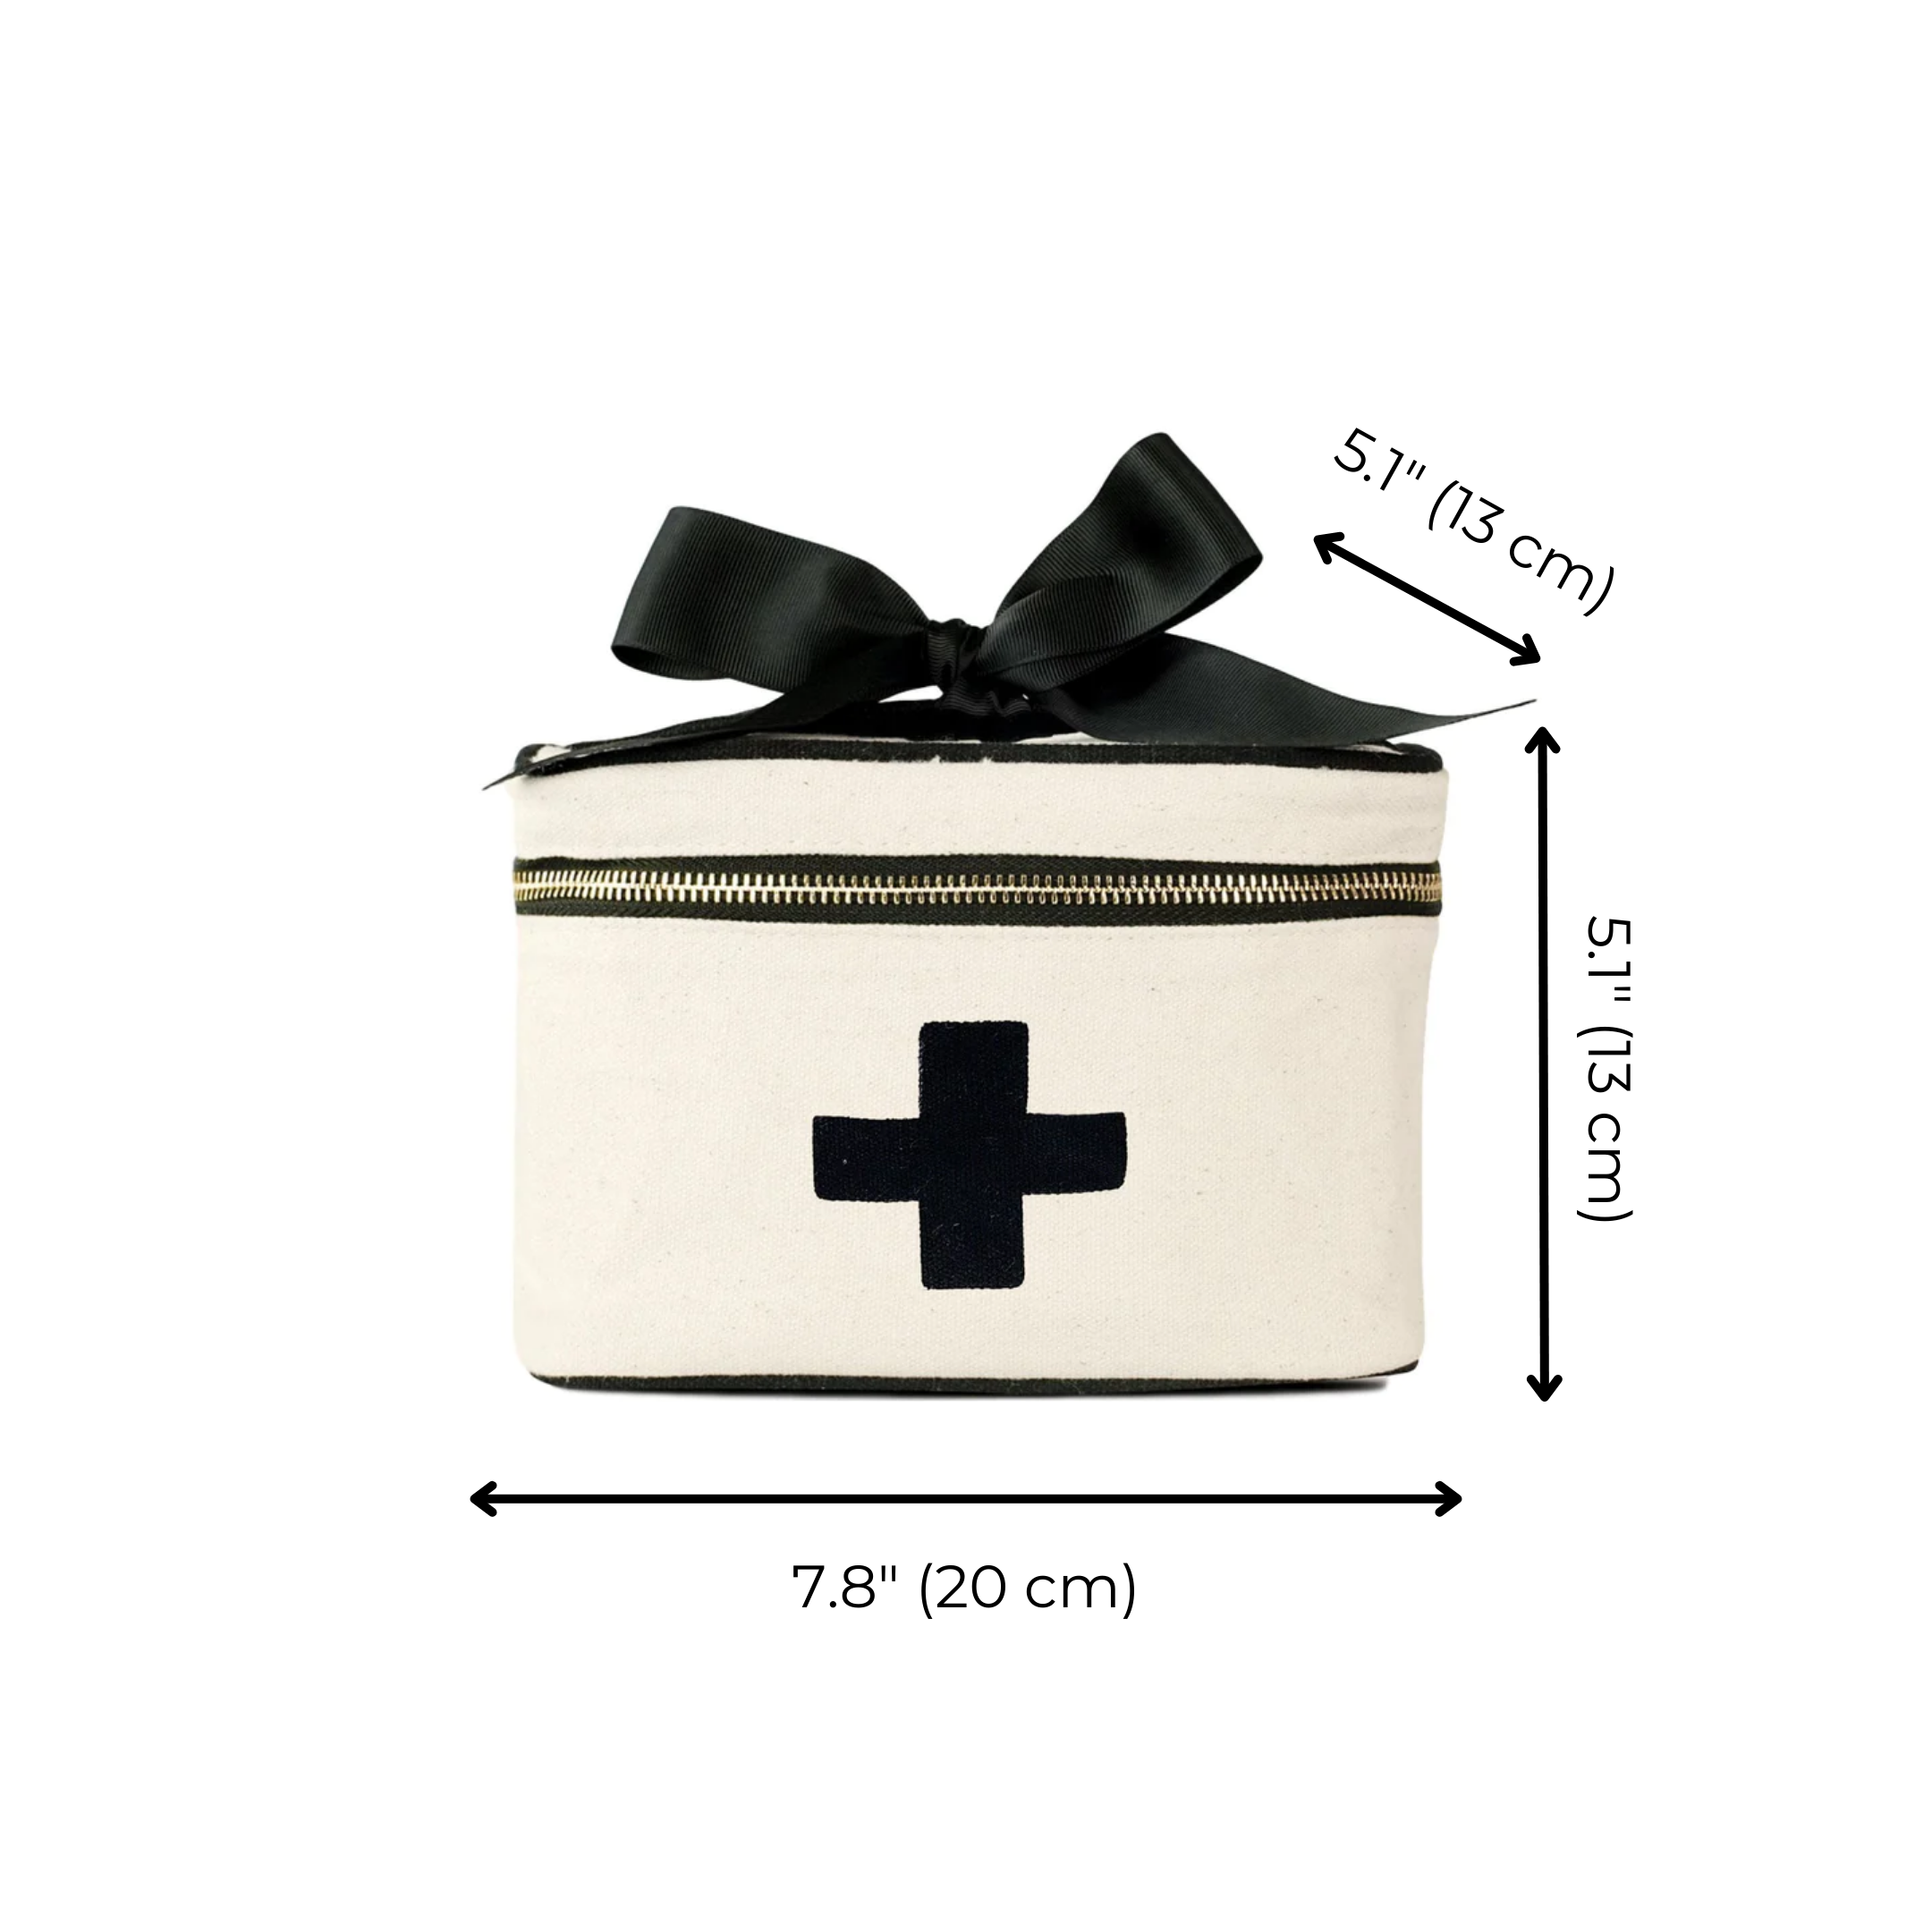 Meds and First Aid Storage Box, Cream | Bag-all